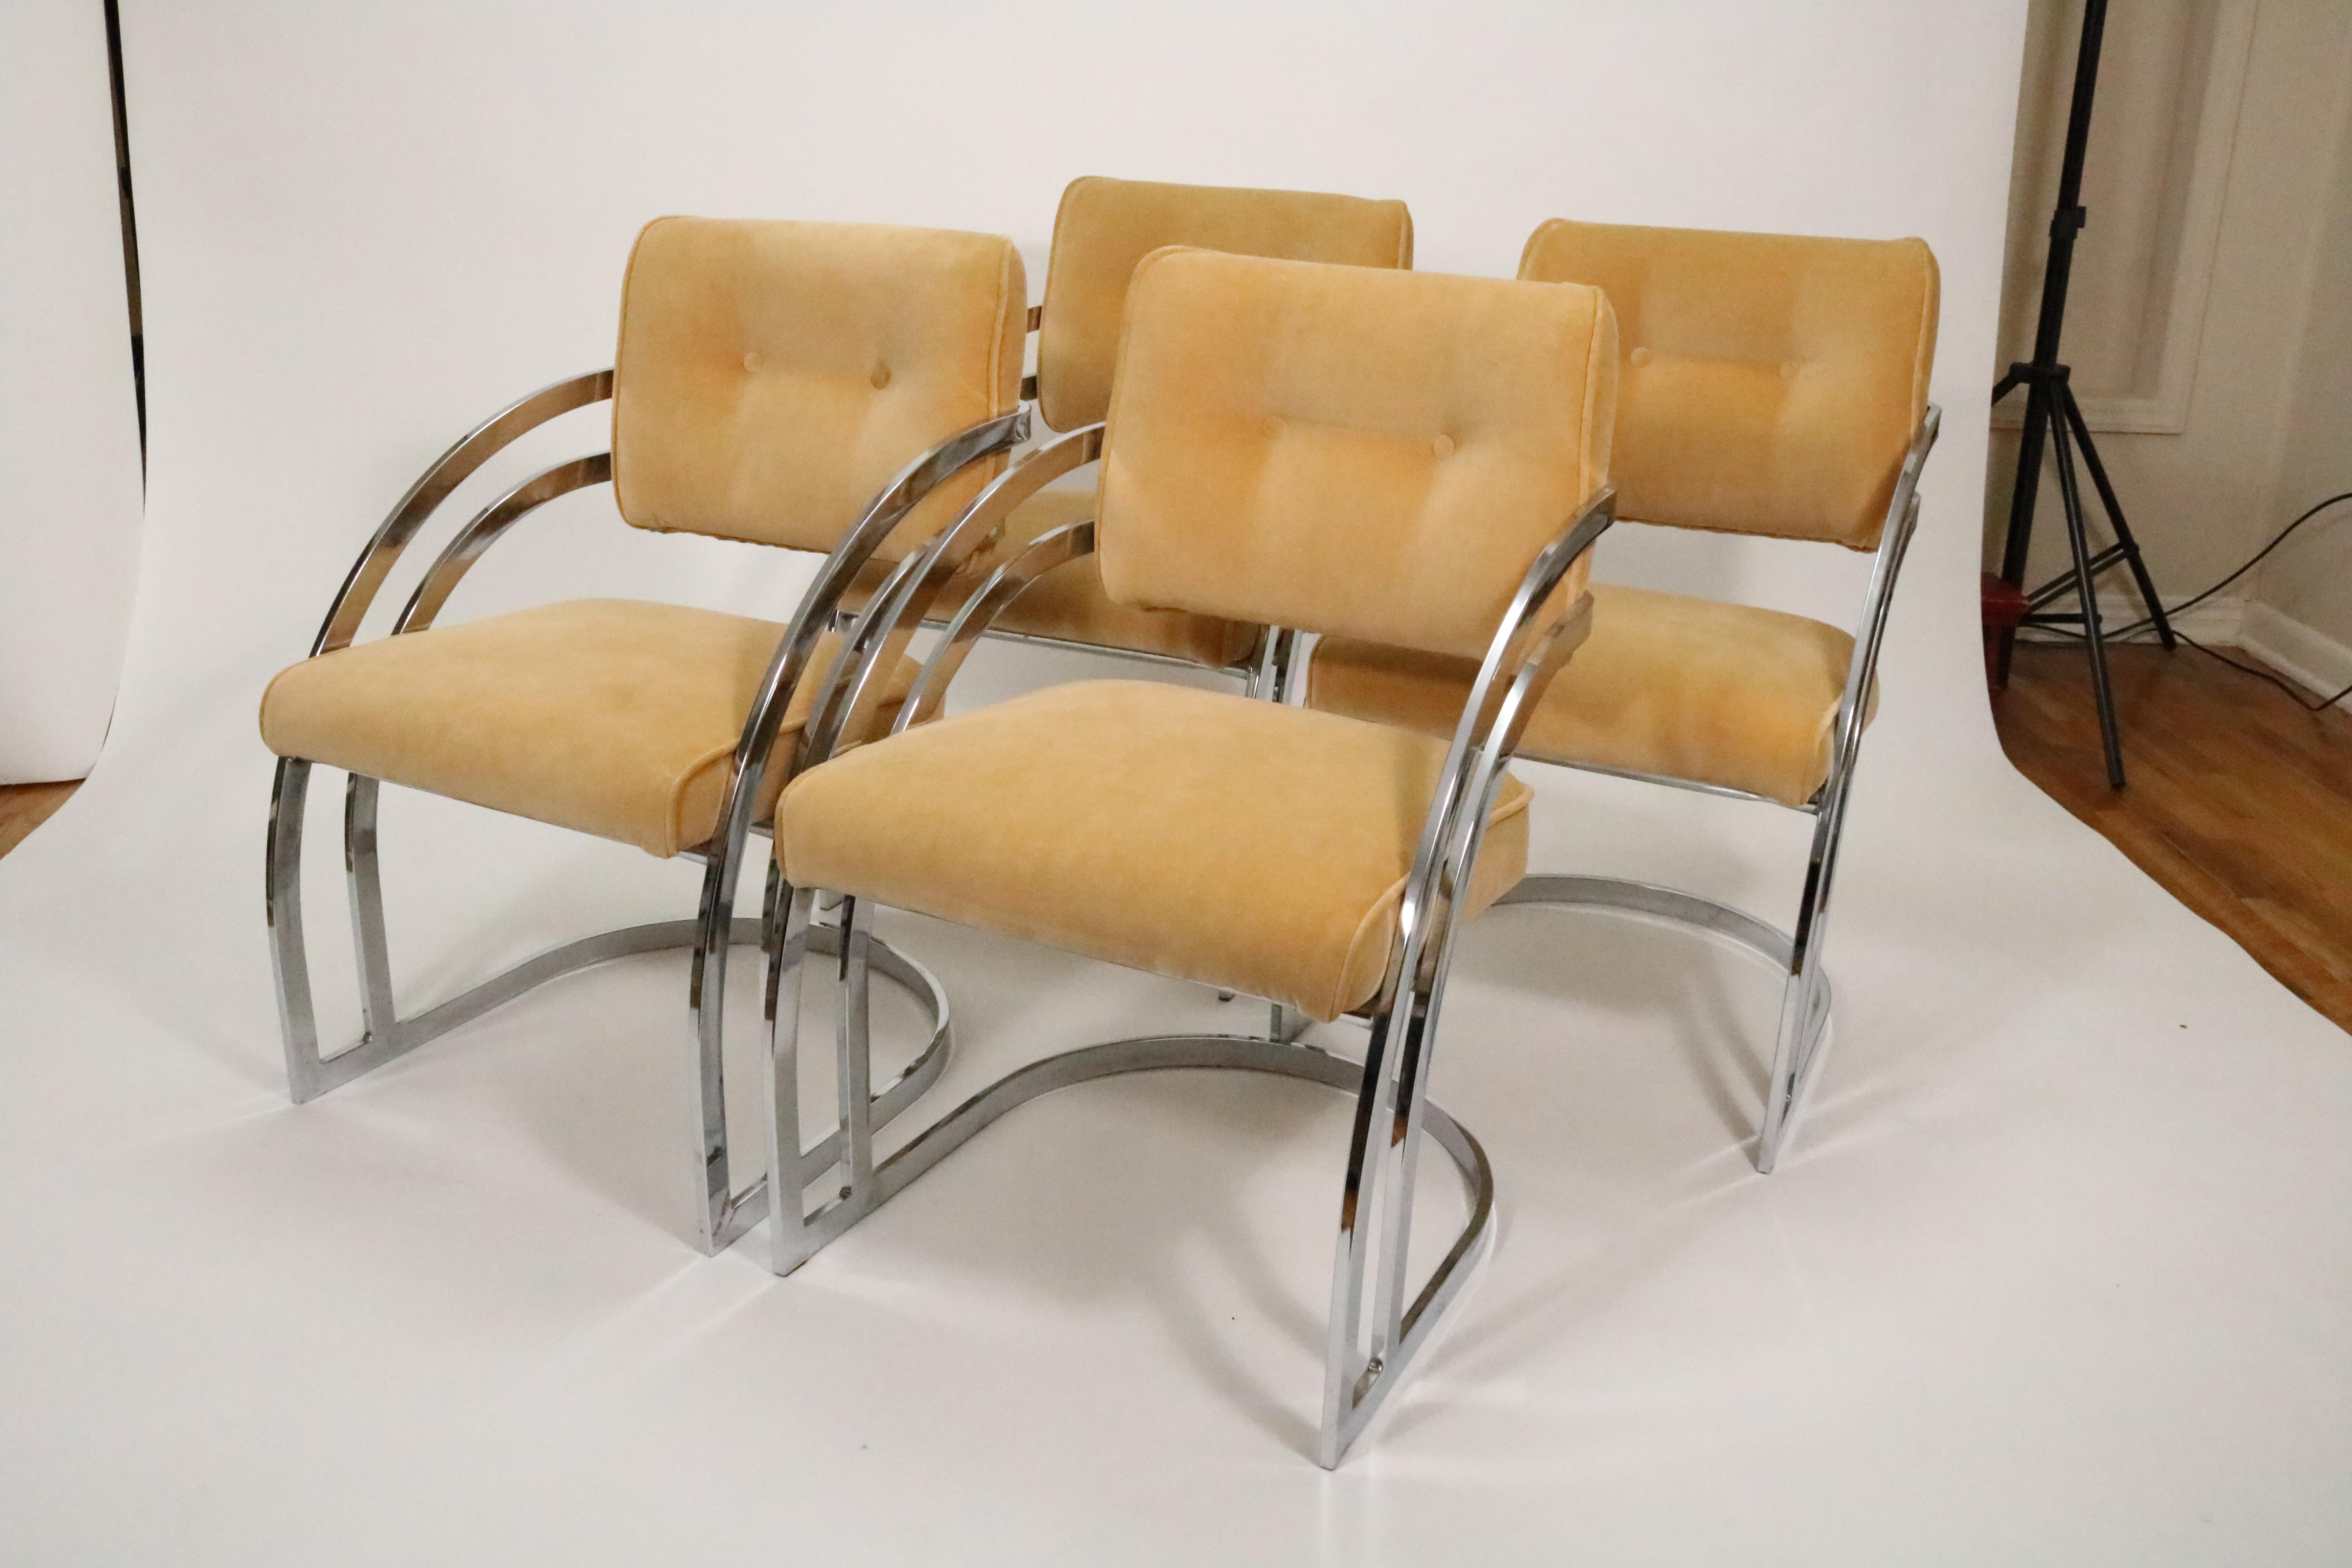 A set of four sculptural chromed steel dining chairs by Cal-Style. The chair back's double bar design and waterfall cantilevered frame create a unique focal point. 

The ample cushions provide comfortable support on the seatbacks and